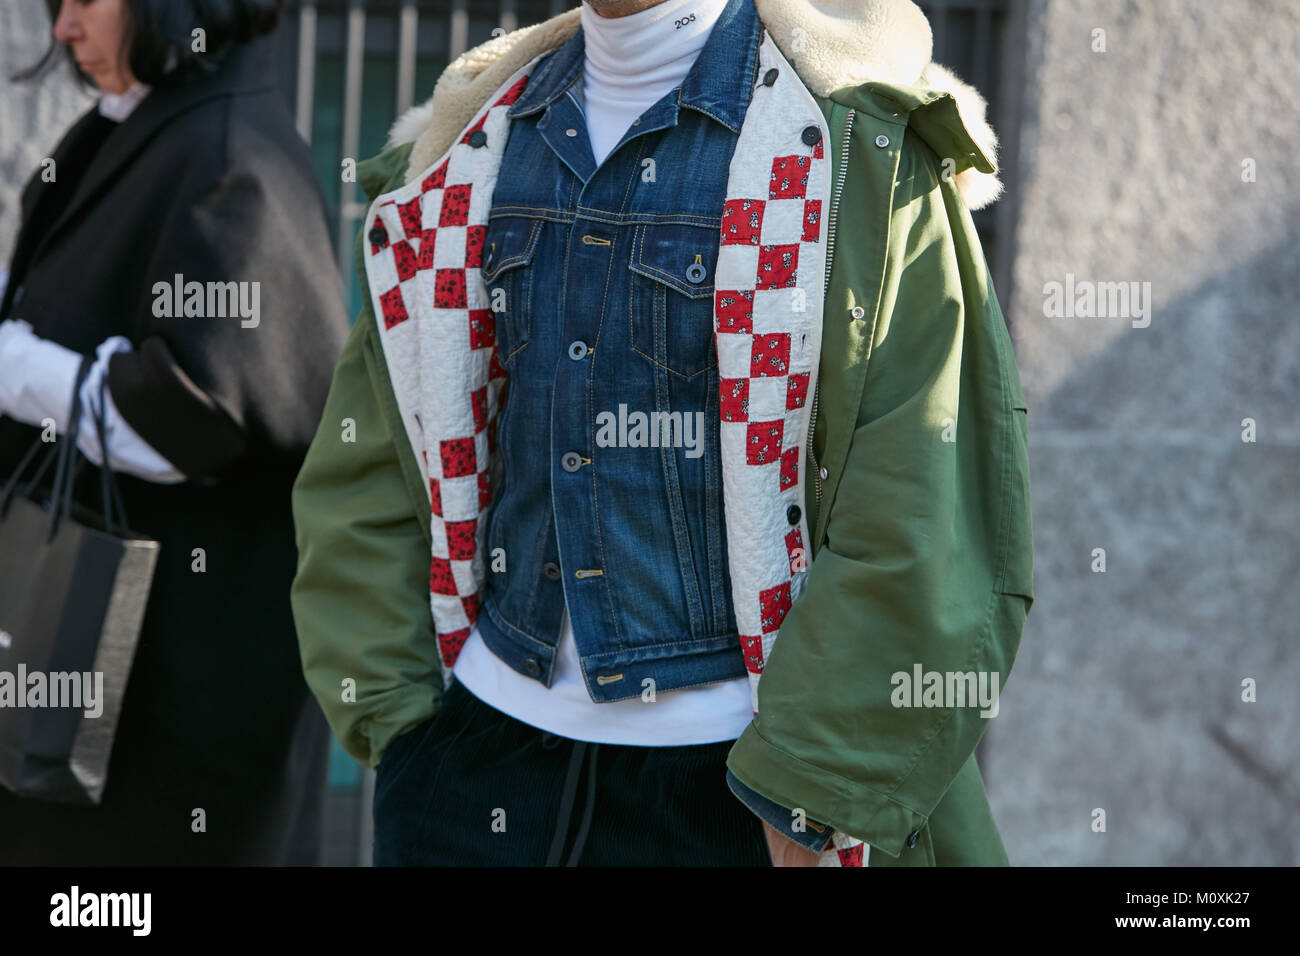 MILAN - JANUARY 13: Man with green parka and blue jeans jacket before Emporio Armani fashion show, Milan Fashion Week street style on January 13, 2018 Stock Photo